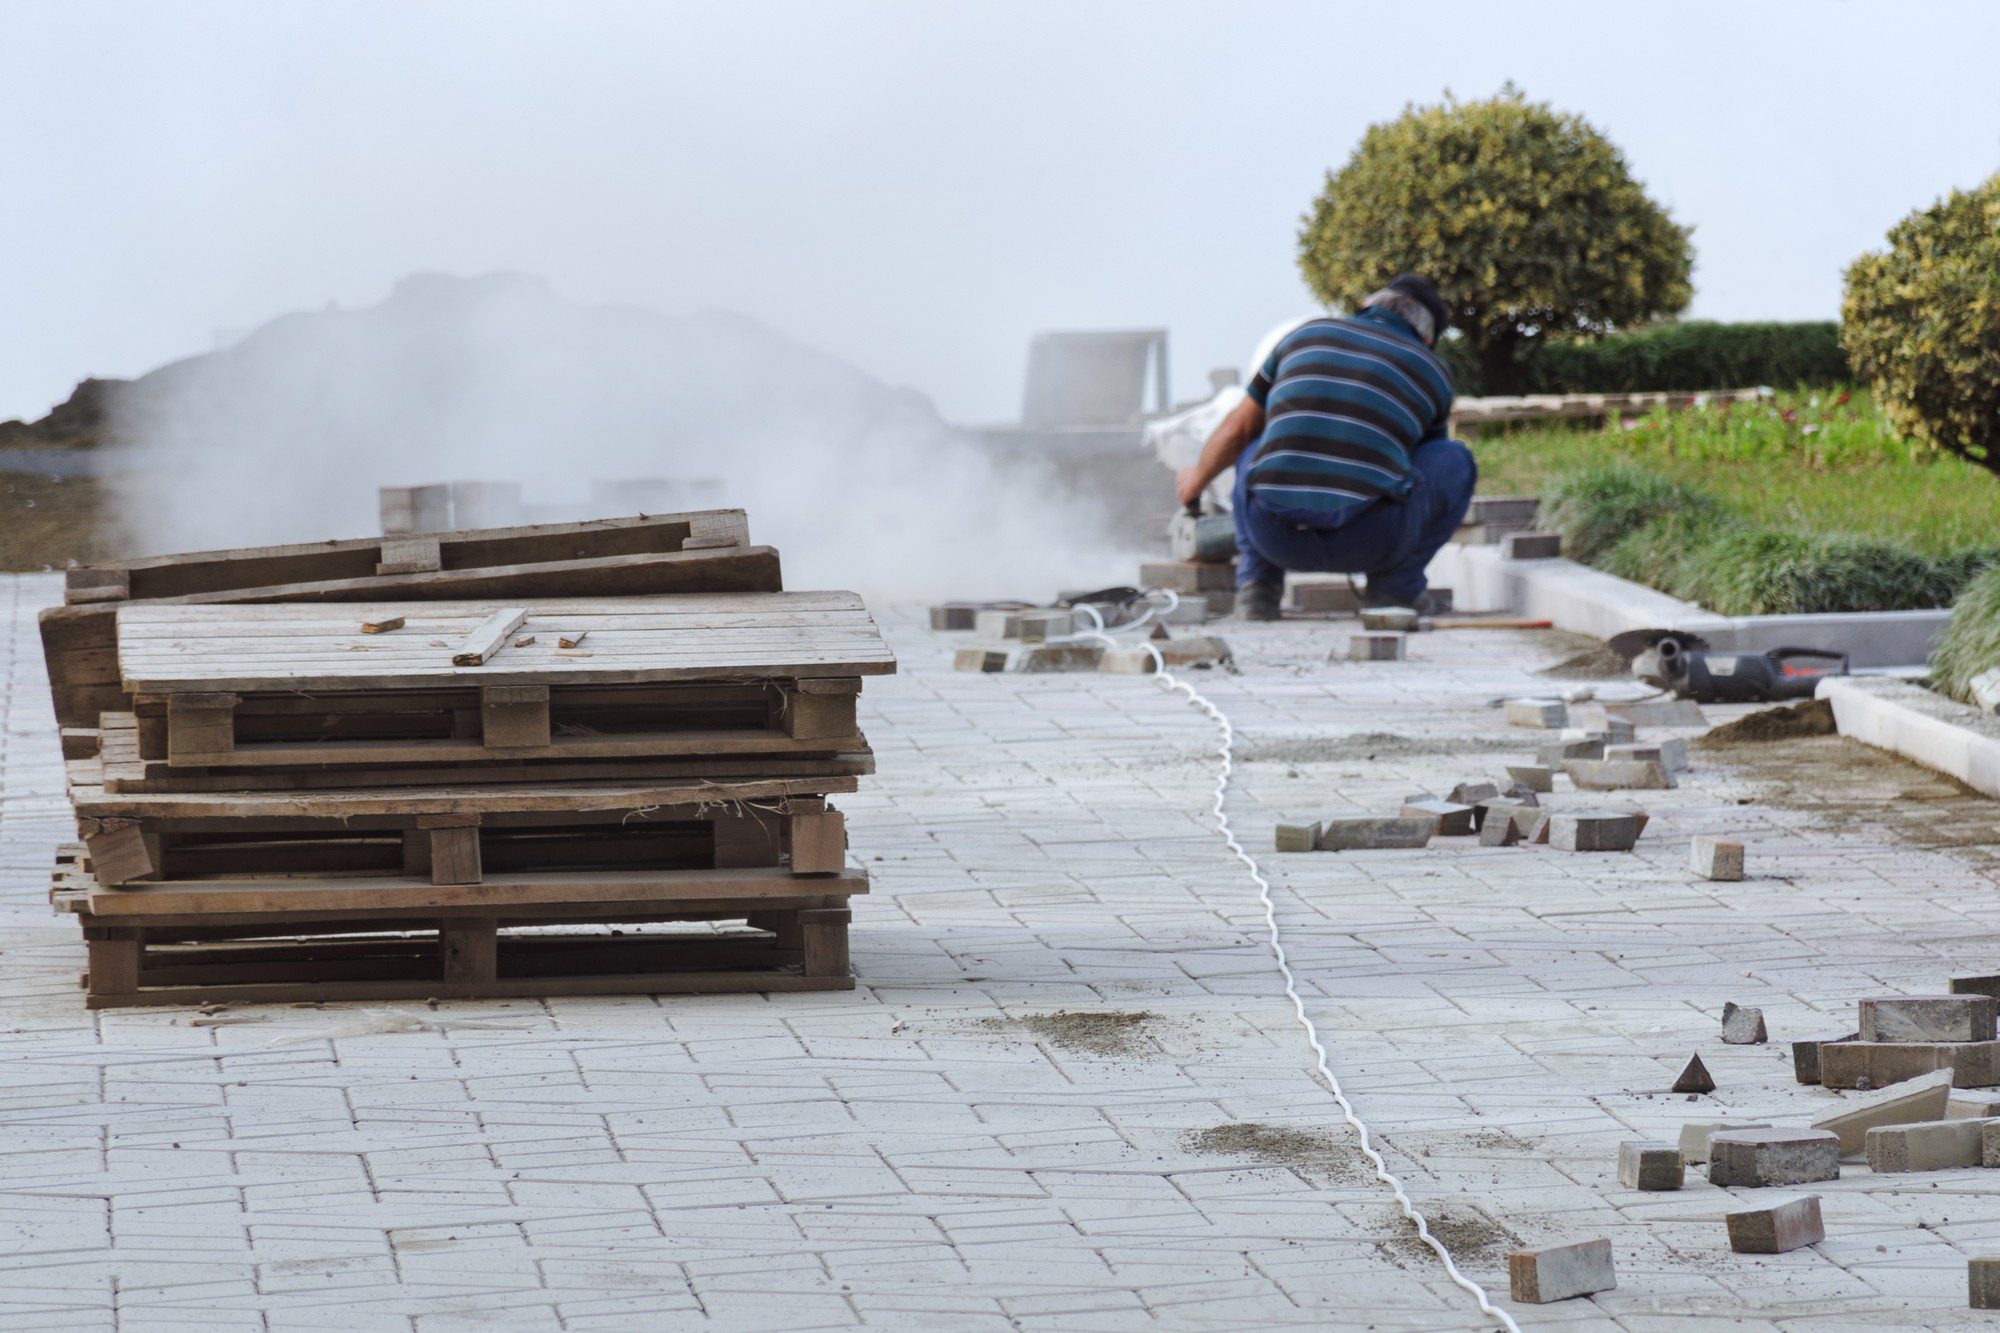 This image shows an outdoor setting where construction or maintenance work is being done. Here are the elements visible in the image:1. A person: There is an individual wearing jeans and a striped shirt, kneeling on the ground and working on what appears to be a section of pavement. The person's posture suggests they might be engaged in laying or cutting pavers or tiles.2. Paving stones: In the foreground, there is a patterned paved surface with some loose paver blocks that are scattered, possibly signalling that work is being done in the area.3. Dust: A cloud of dust is visible near the person, indicating some kind of activity that is creating airborne particles, such as cutting or moving dry materials.4. Wooden pallets: A stack of wooden pallets is prominent in the foreground, likely used to carry and organize the pavers or other construction materials.5. Construction equipment: In the vicinity of the person, there appears to be some type of electrical equipment, possibly a saw or another tool used for cutting the paving stones.6. Greenery: In the background, there is vegetation such as shrubs and a small tree, suggesting this might be a park or a landscaped area that is undergoing renovation or construction.The overall scene depicts a construction or repair job in an outdoor landscaped environment. The focus of the work seems to be on the pavement area.